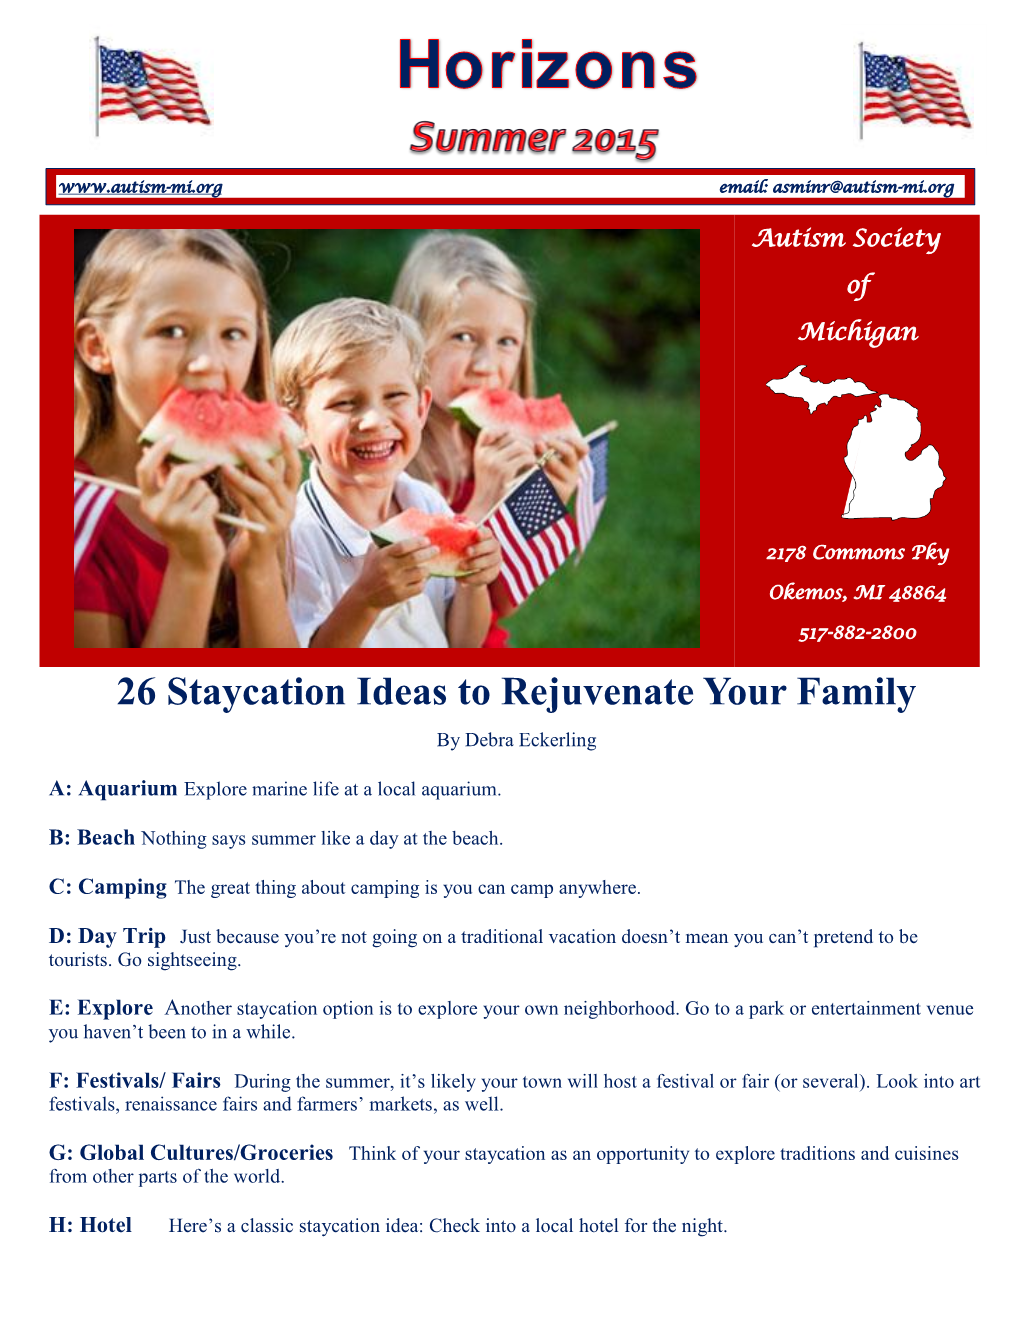 26 Staycation Ideas to Rejuvenate Your Family by Debra Eckerling